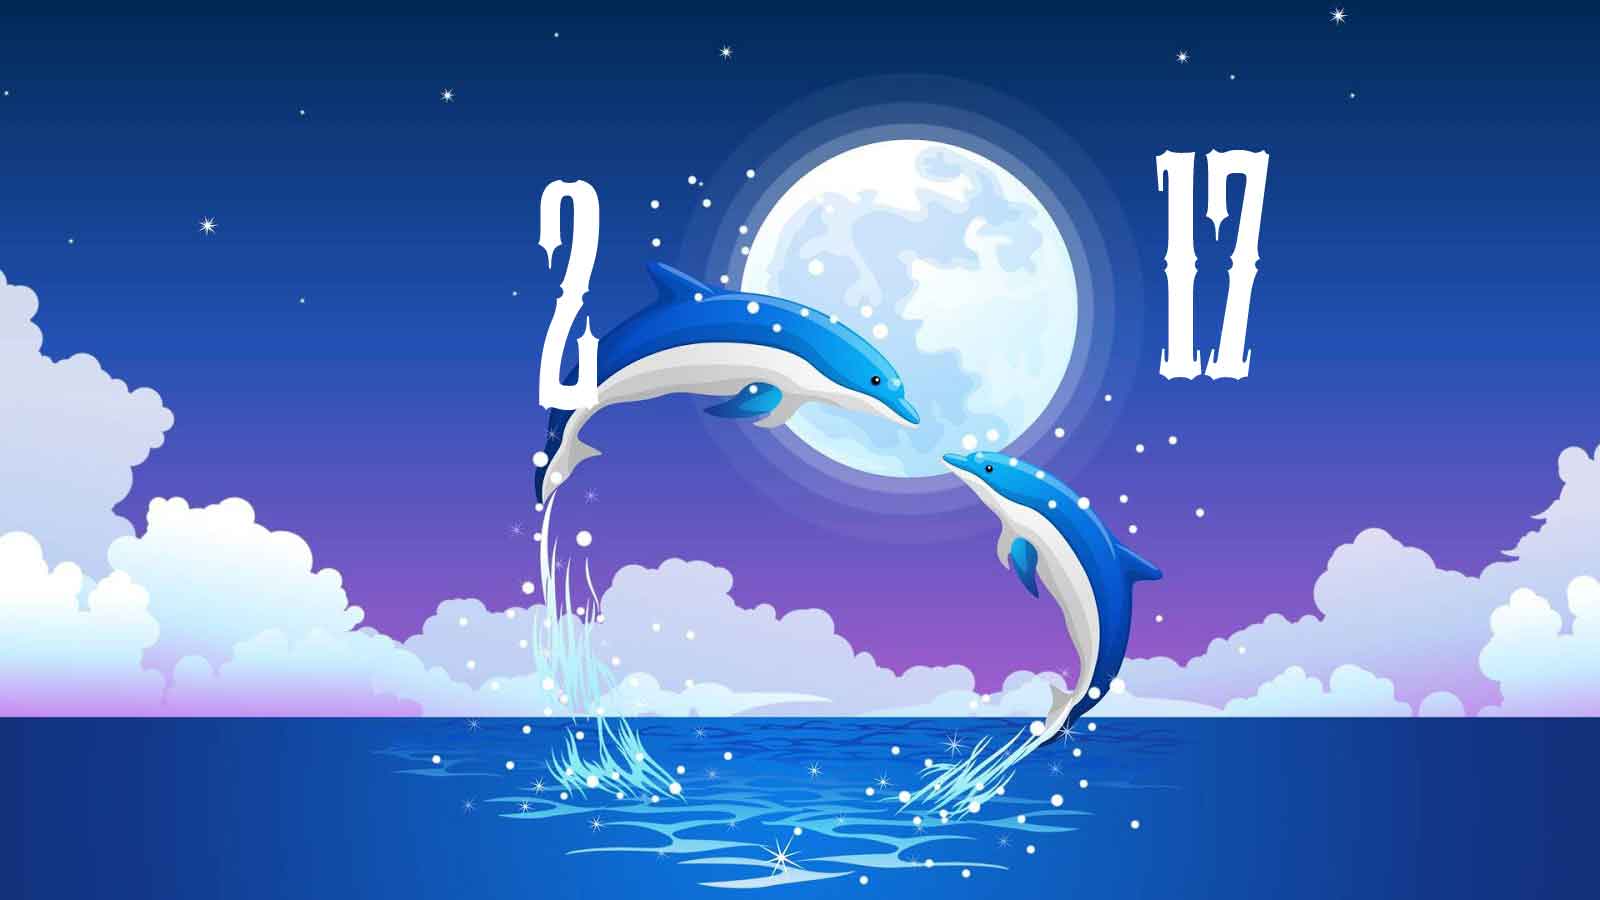 best new year wallpaper,water,sky,dolphin,graphic design,illustration